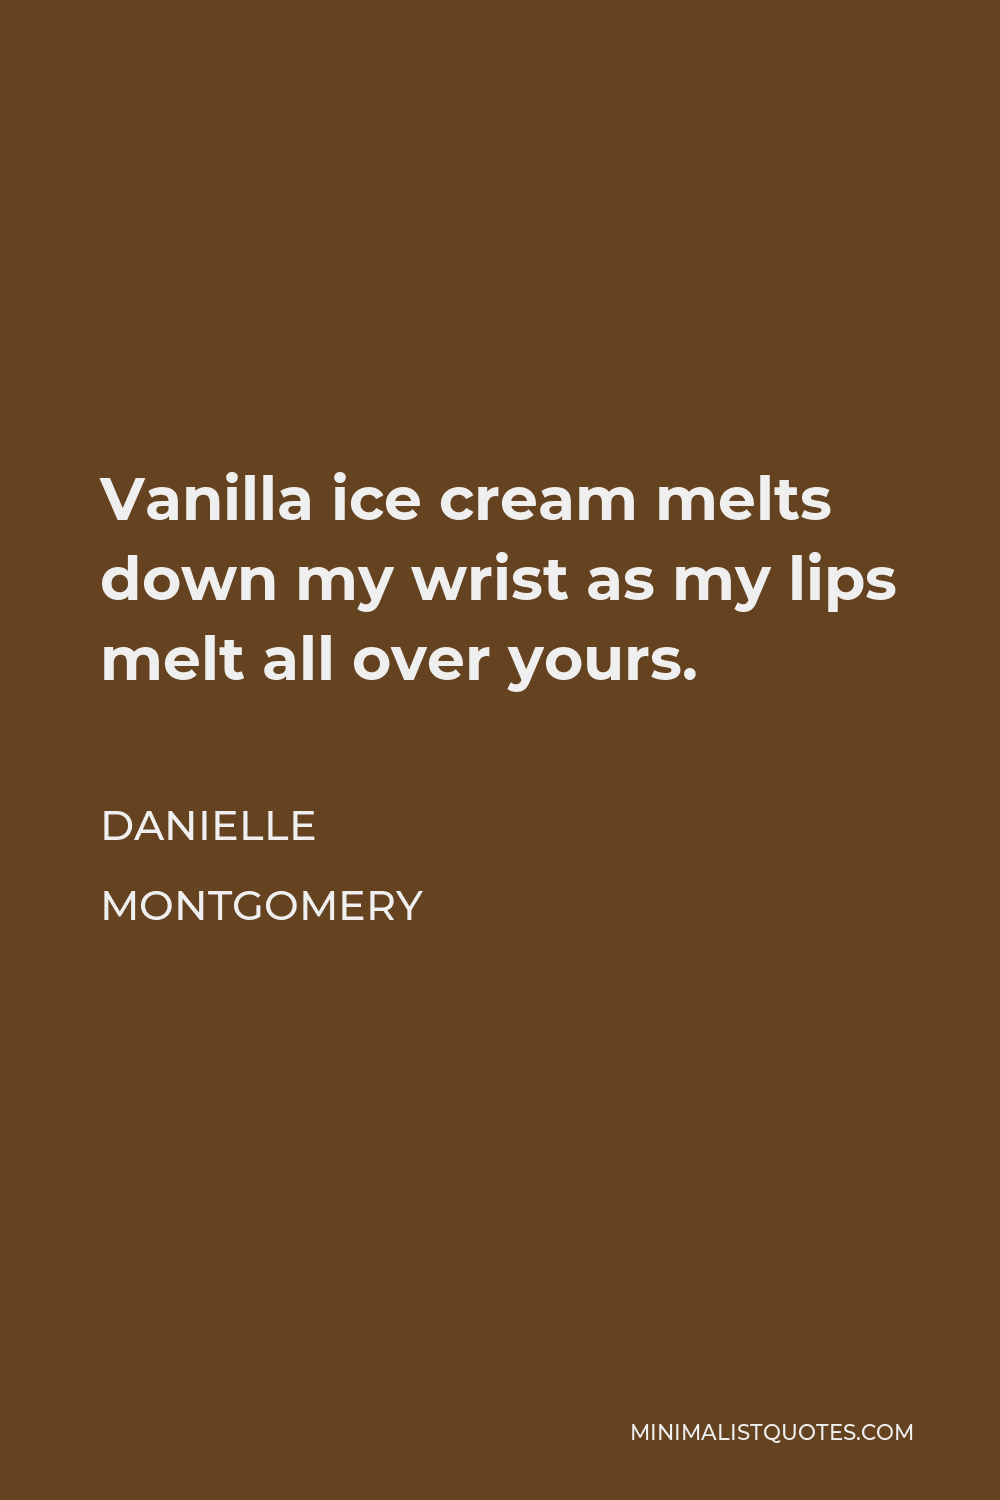 Danielle Montgomery Quote - Vanilla ice cream melts down my wrist as my lips melt all over yours.